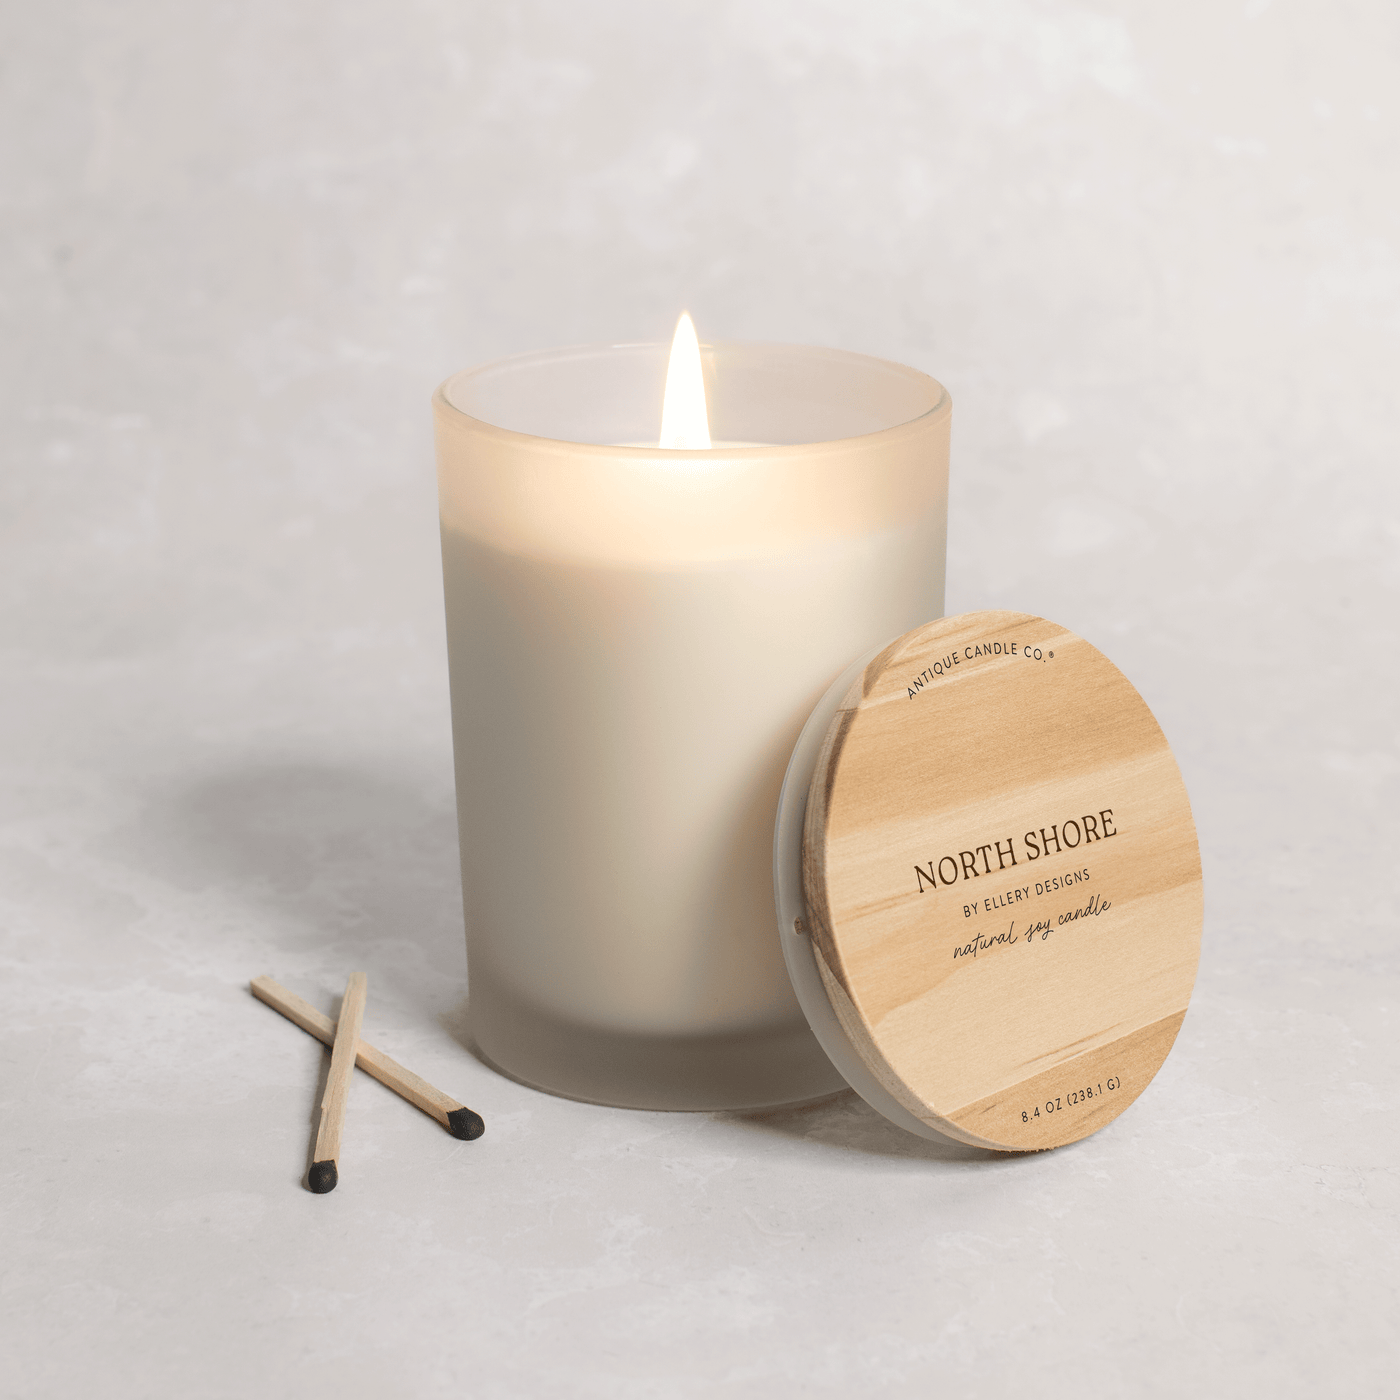 North Shore by Ellery Designs Luxe Candle